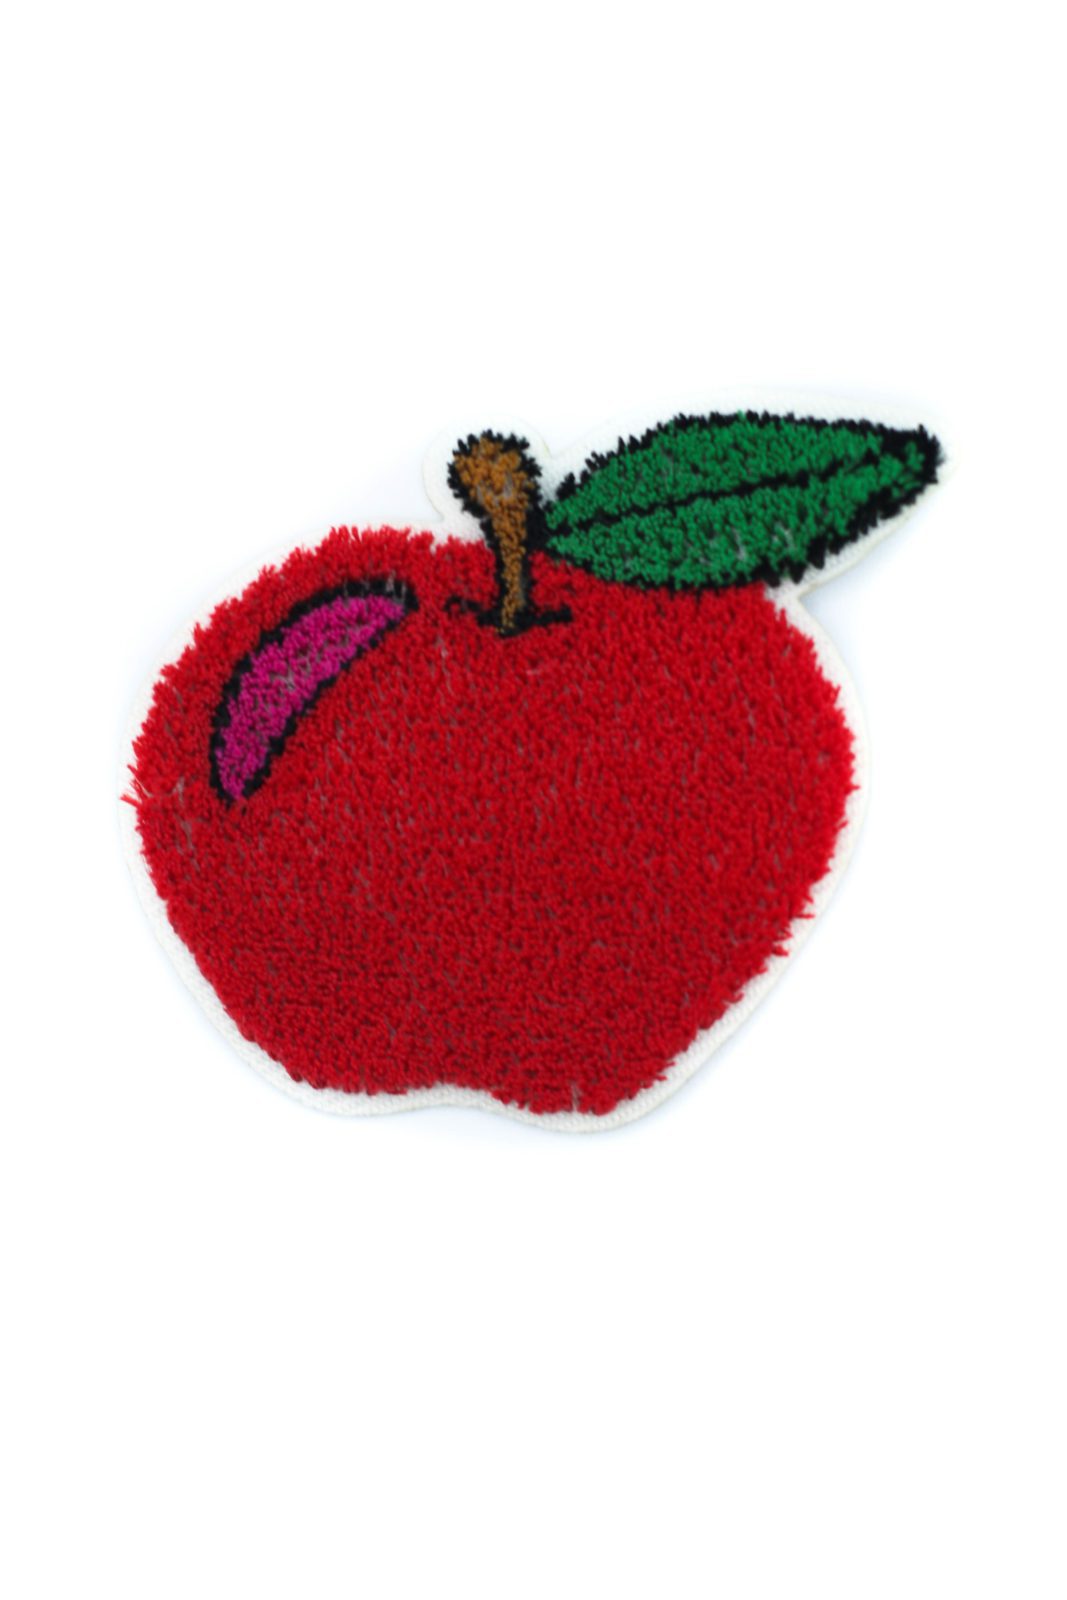 Red apple iron on chenille patches